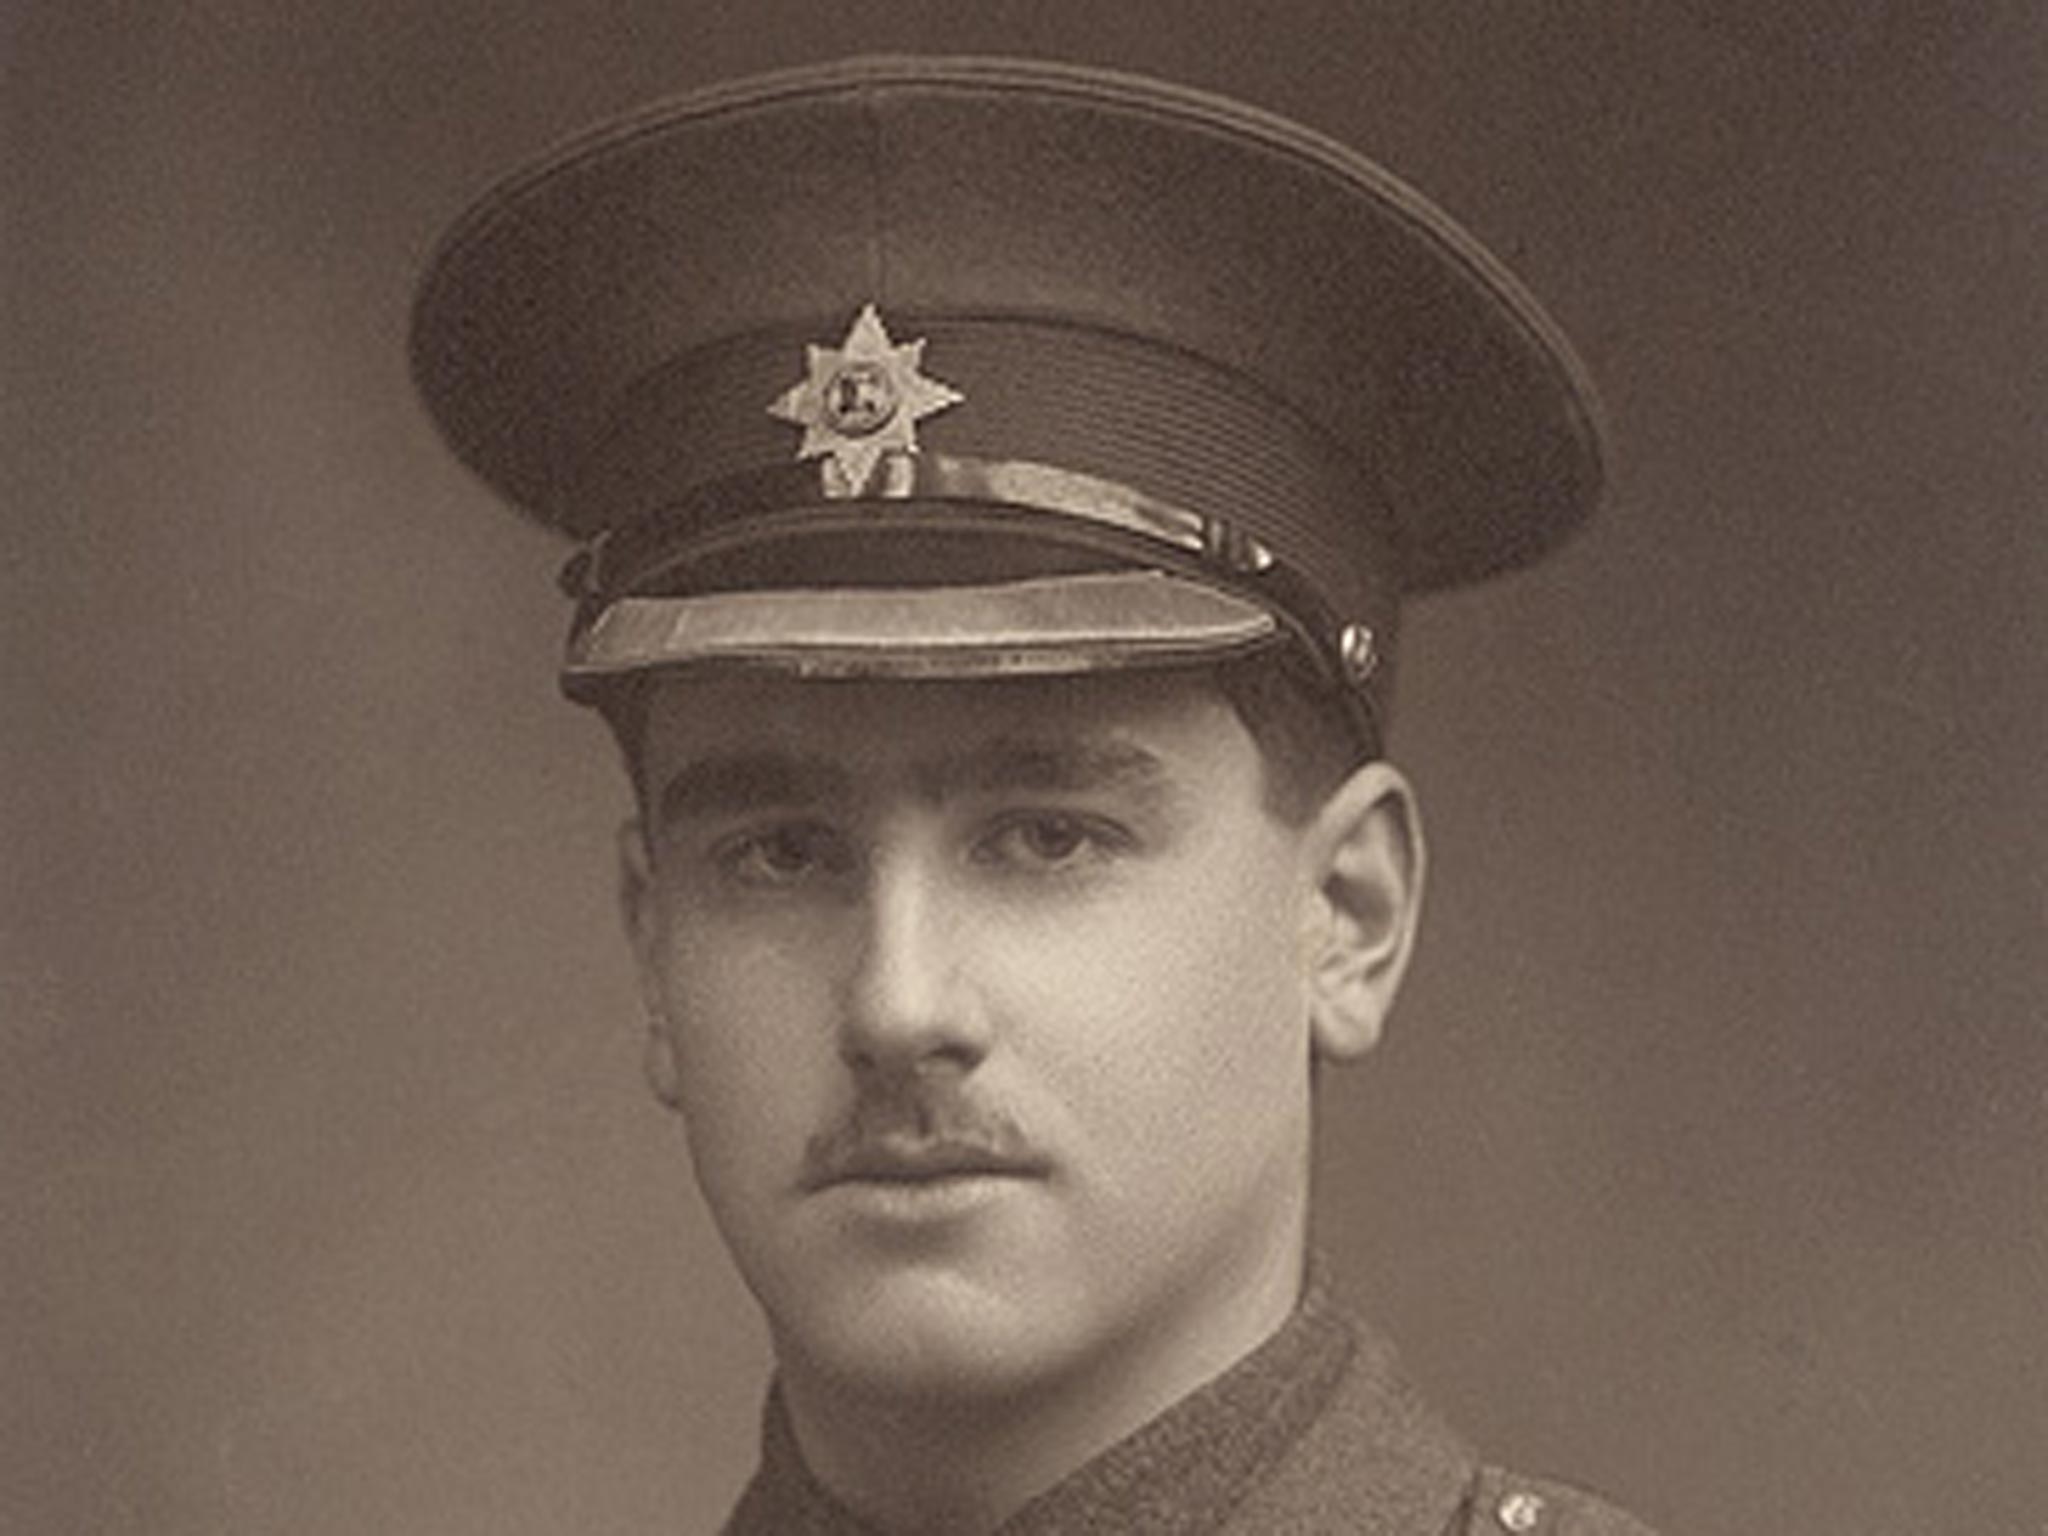 2nd Lieutenant John Kipling is thought to have been killed in The Chalk Pit, in Loos, France, on 27 September 1915